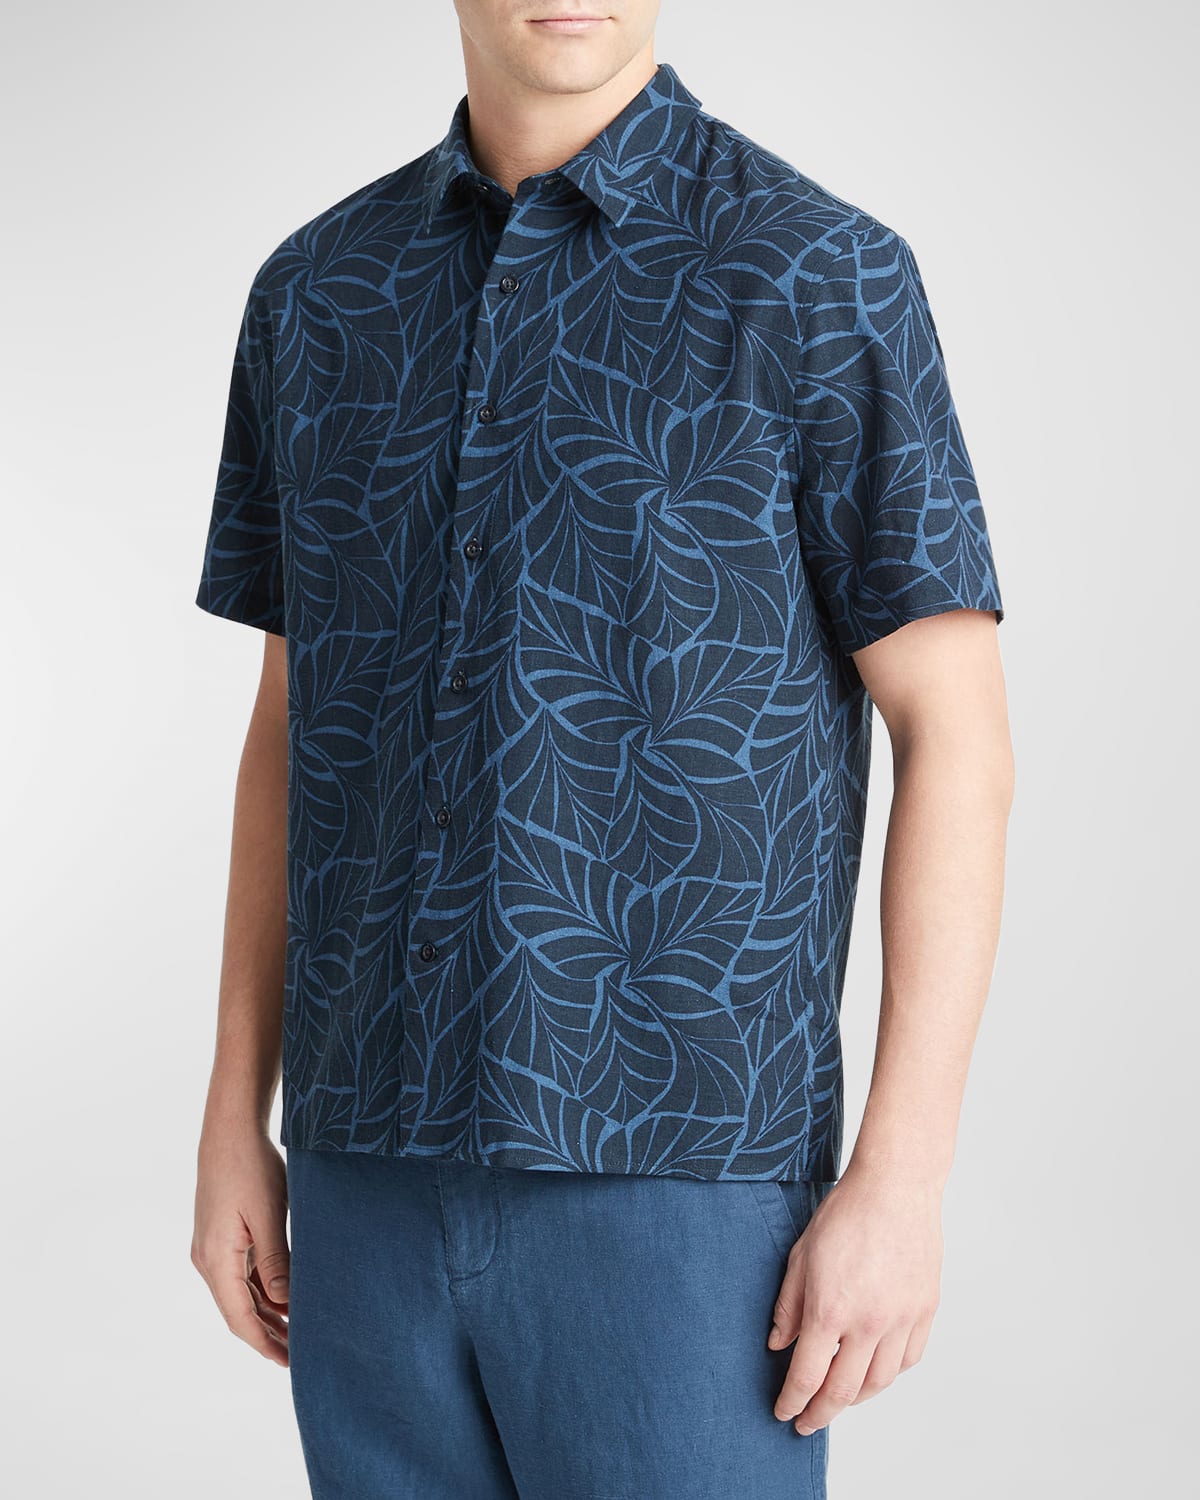 Men's Knotted Leaves Sport Shirt